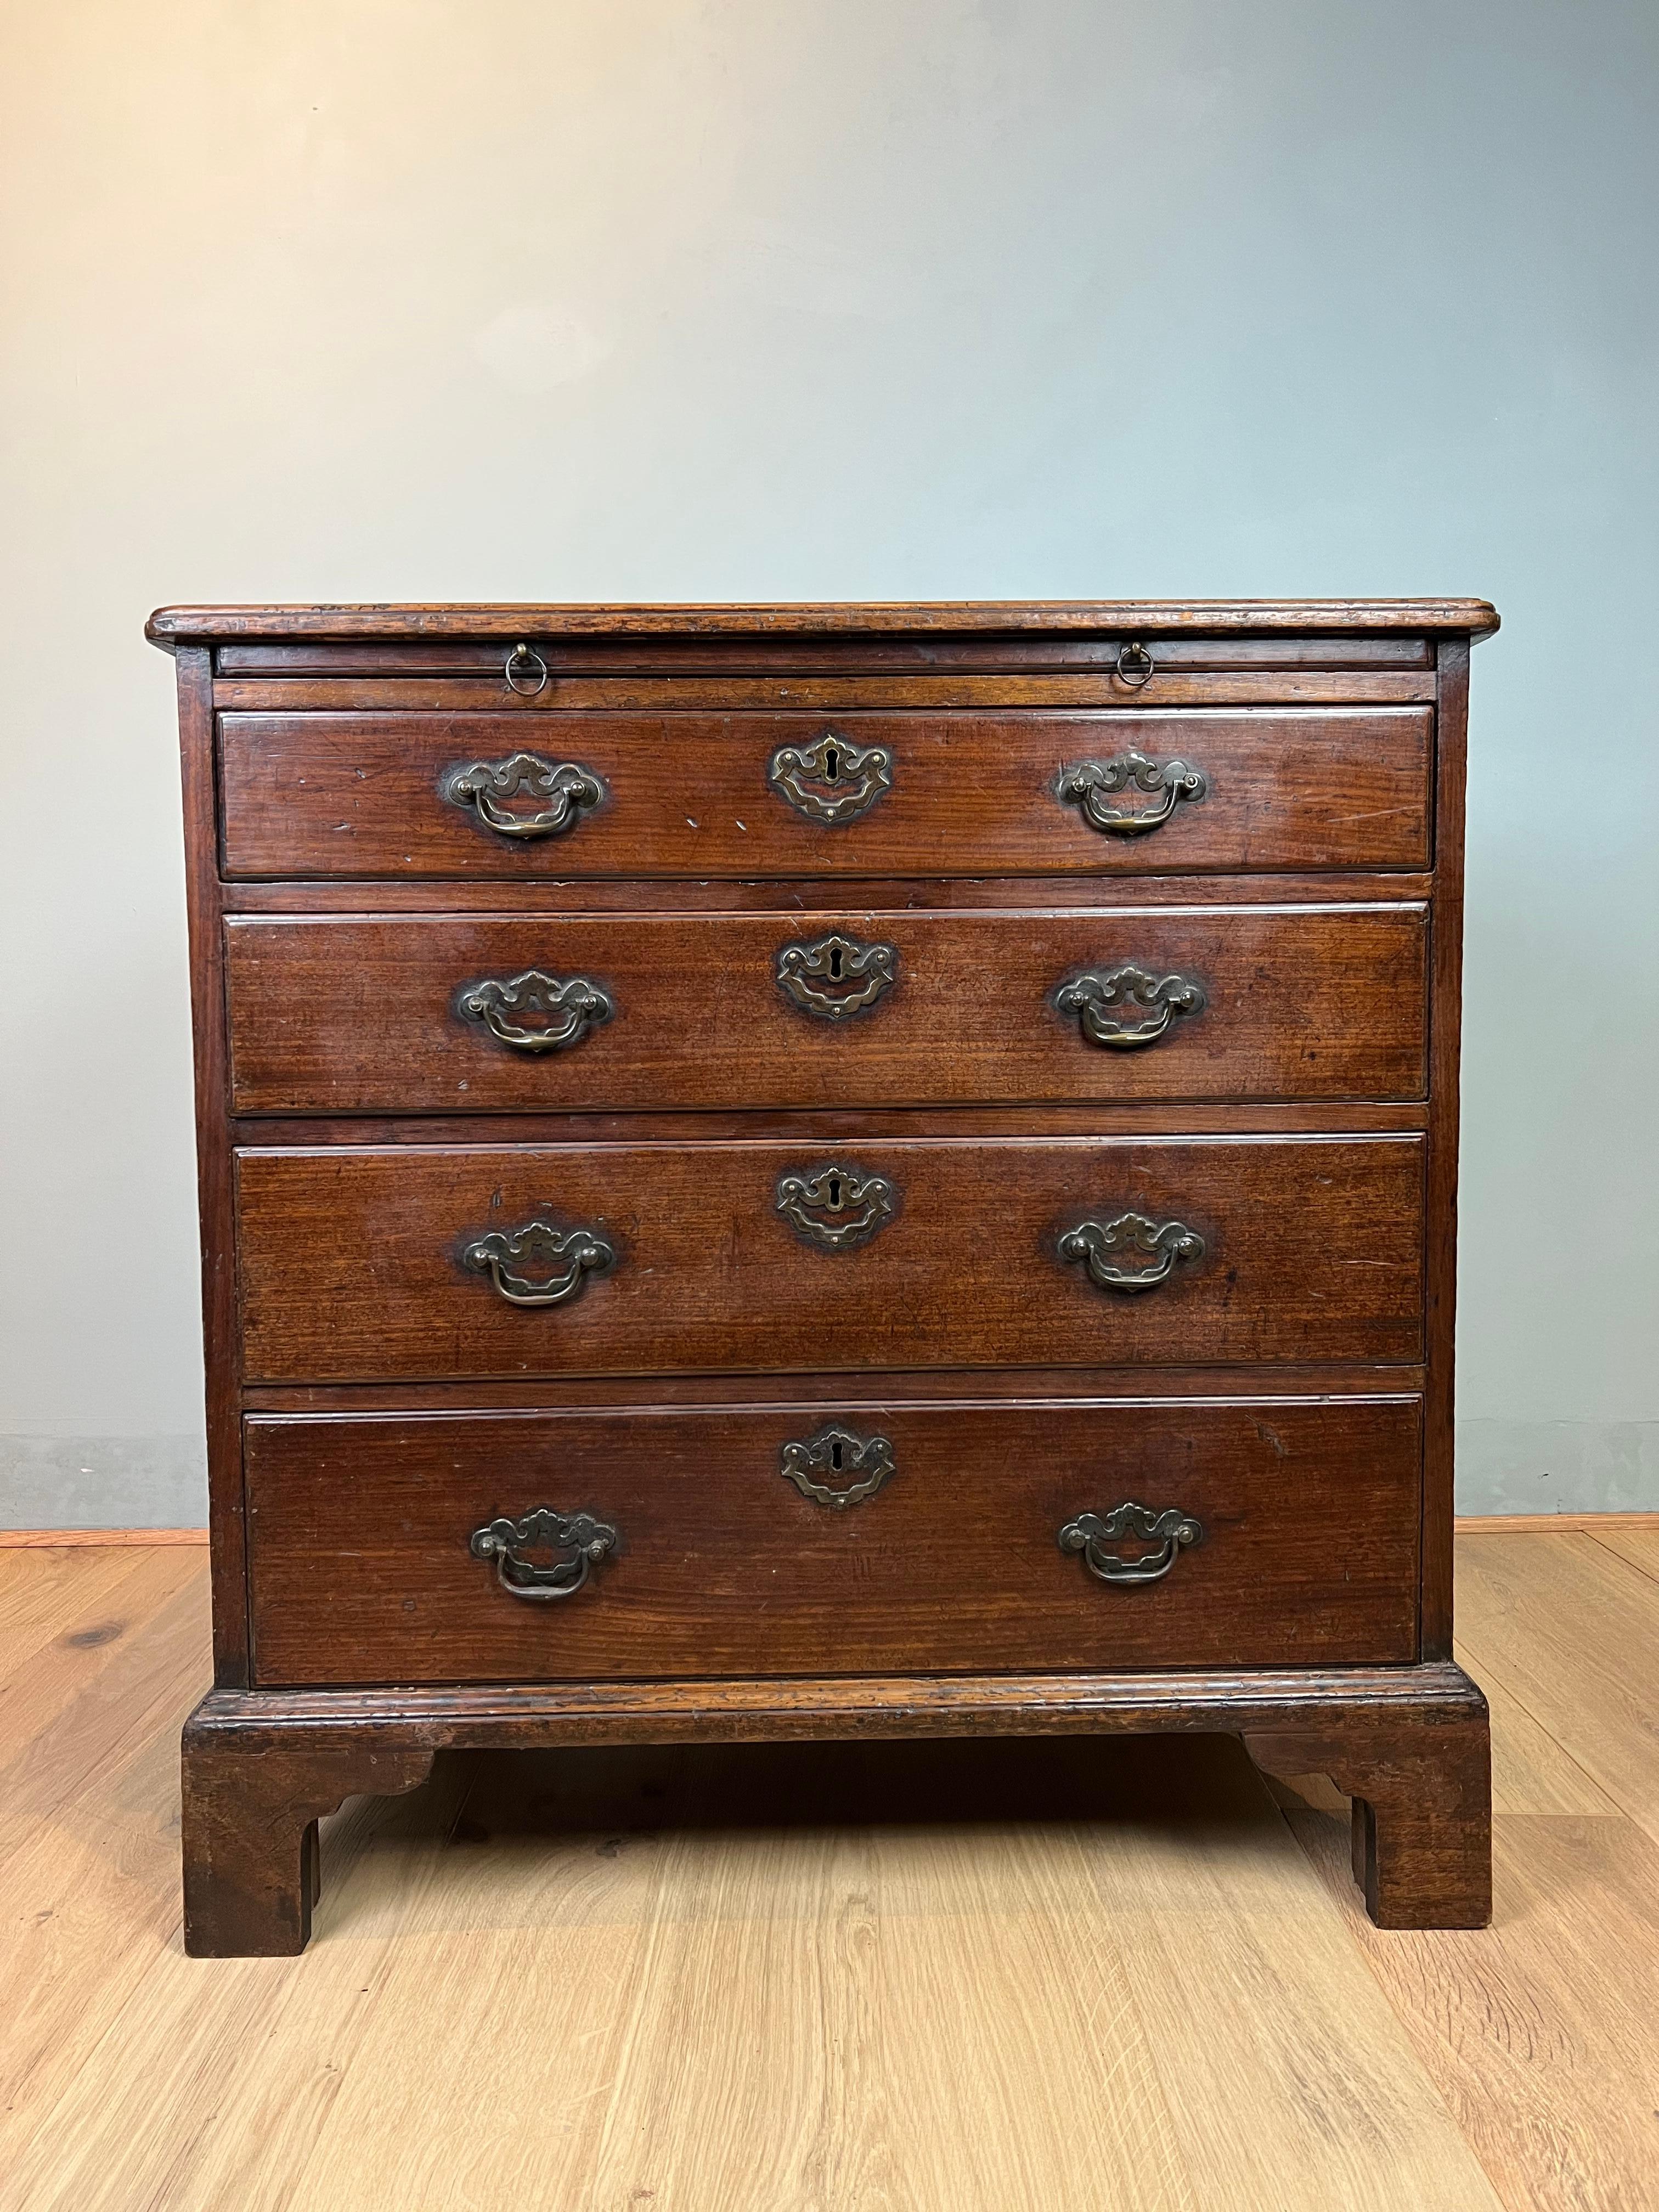 This George the 2nd chest of drawers is made from fine quality Virginian walnut, which has aged to lovely caramel tones. Sweet size, made in the mid 18th century, it has nice fine oak linings and the original oak back boards.
A retractable brushing